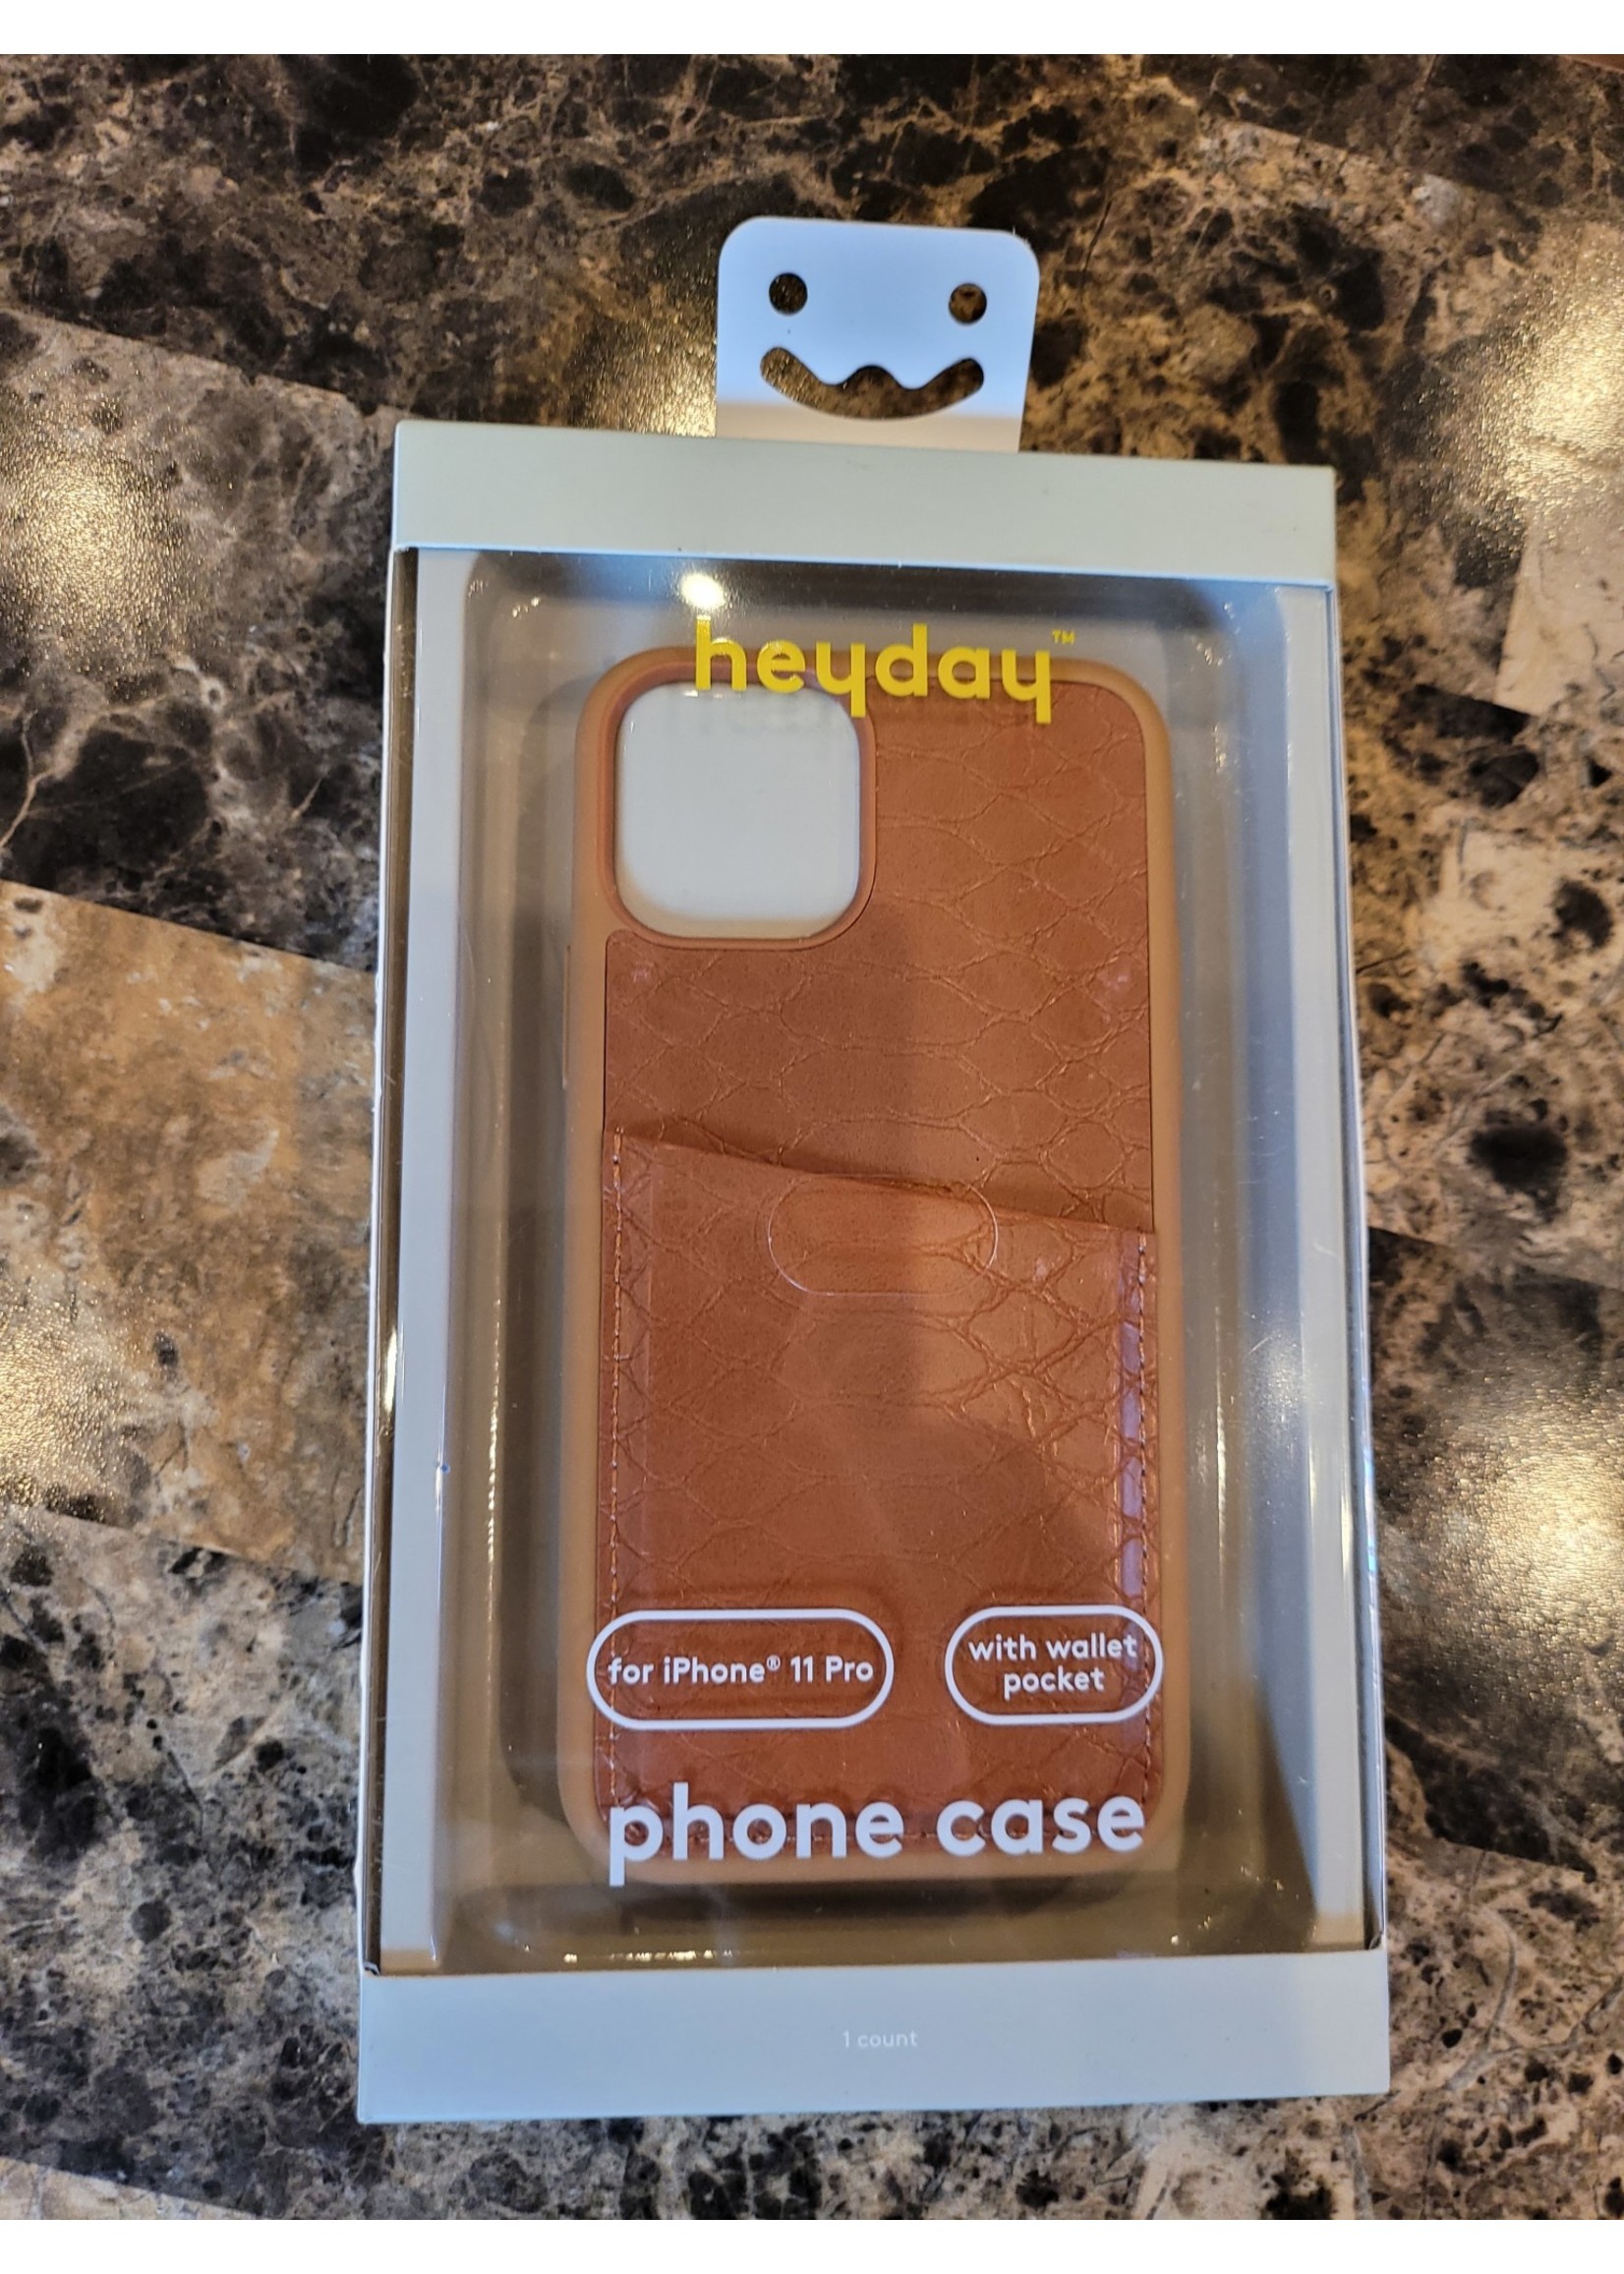 heyday™ Apple iPhone 11 Pro Case with Pockets - Tan Crocodile